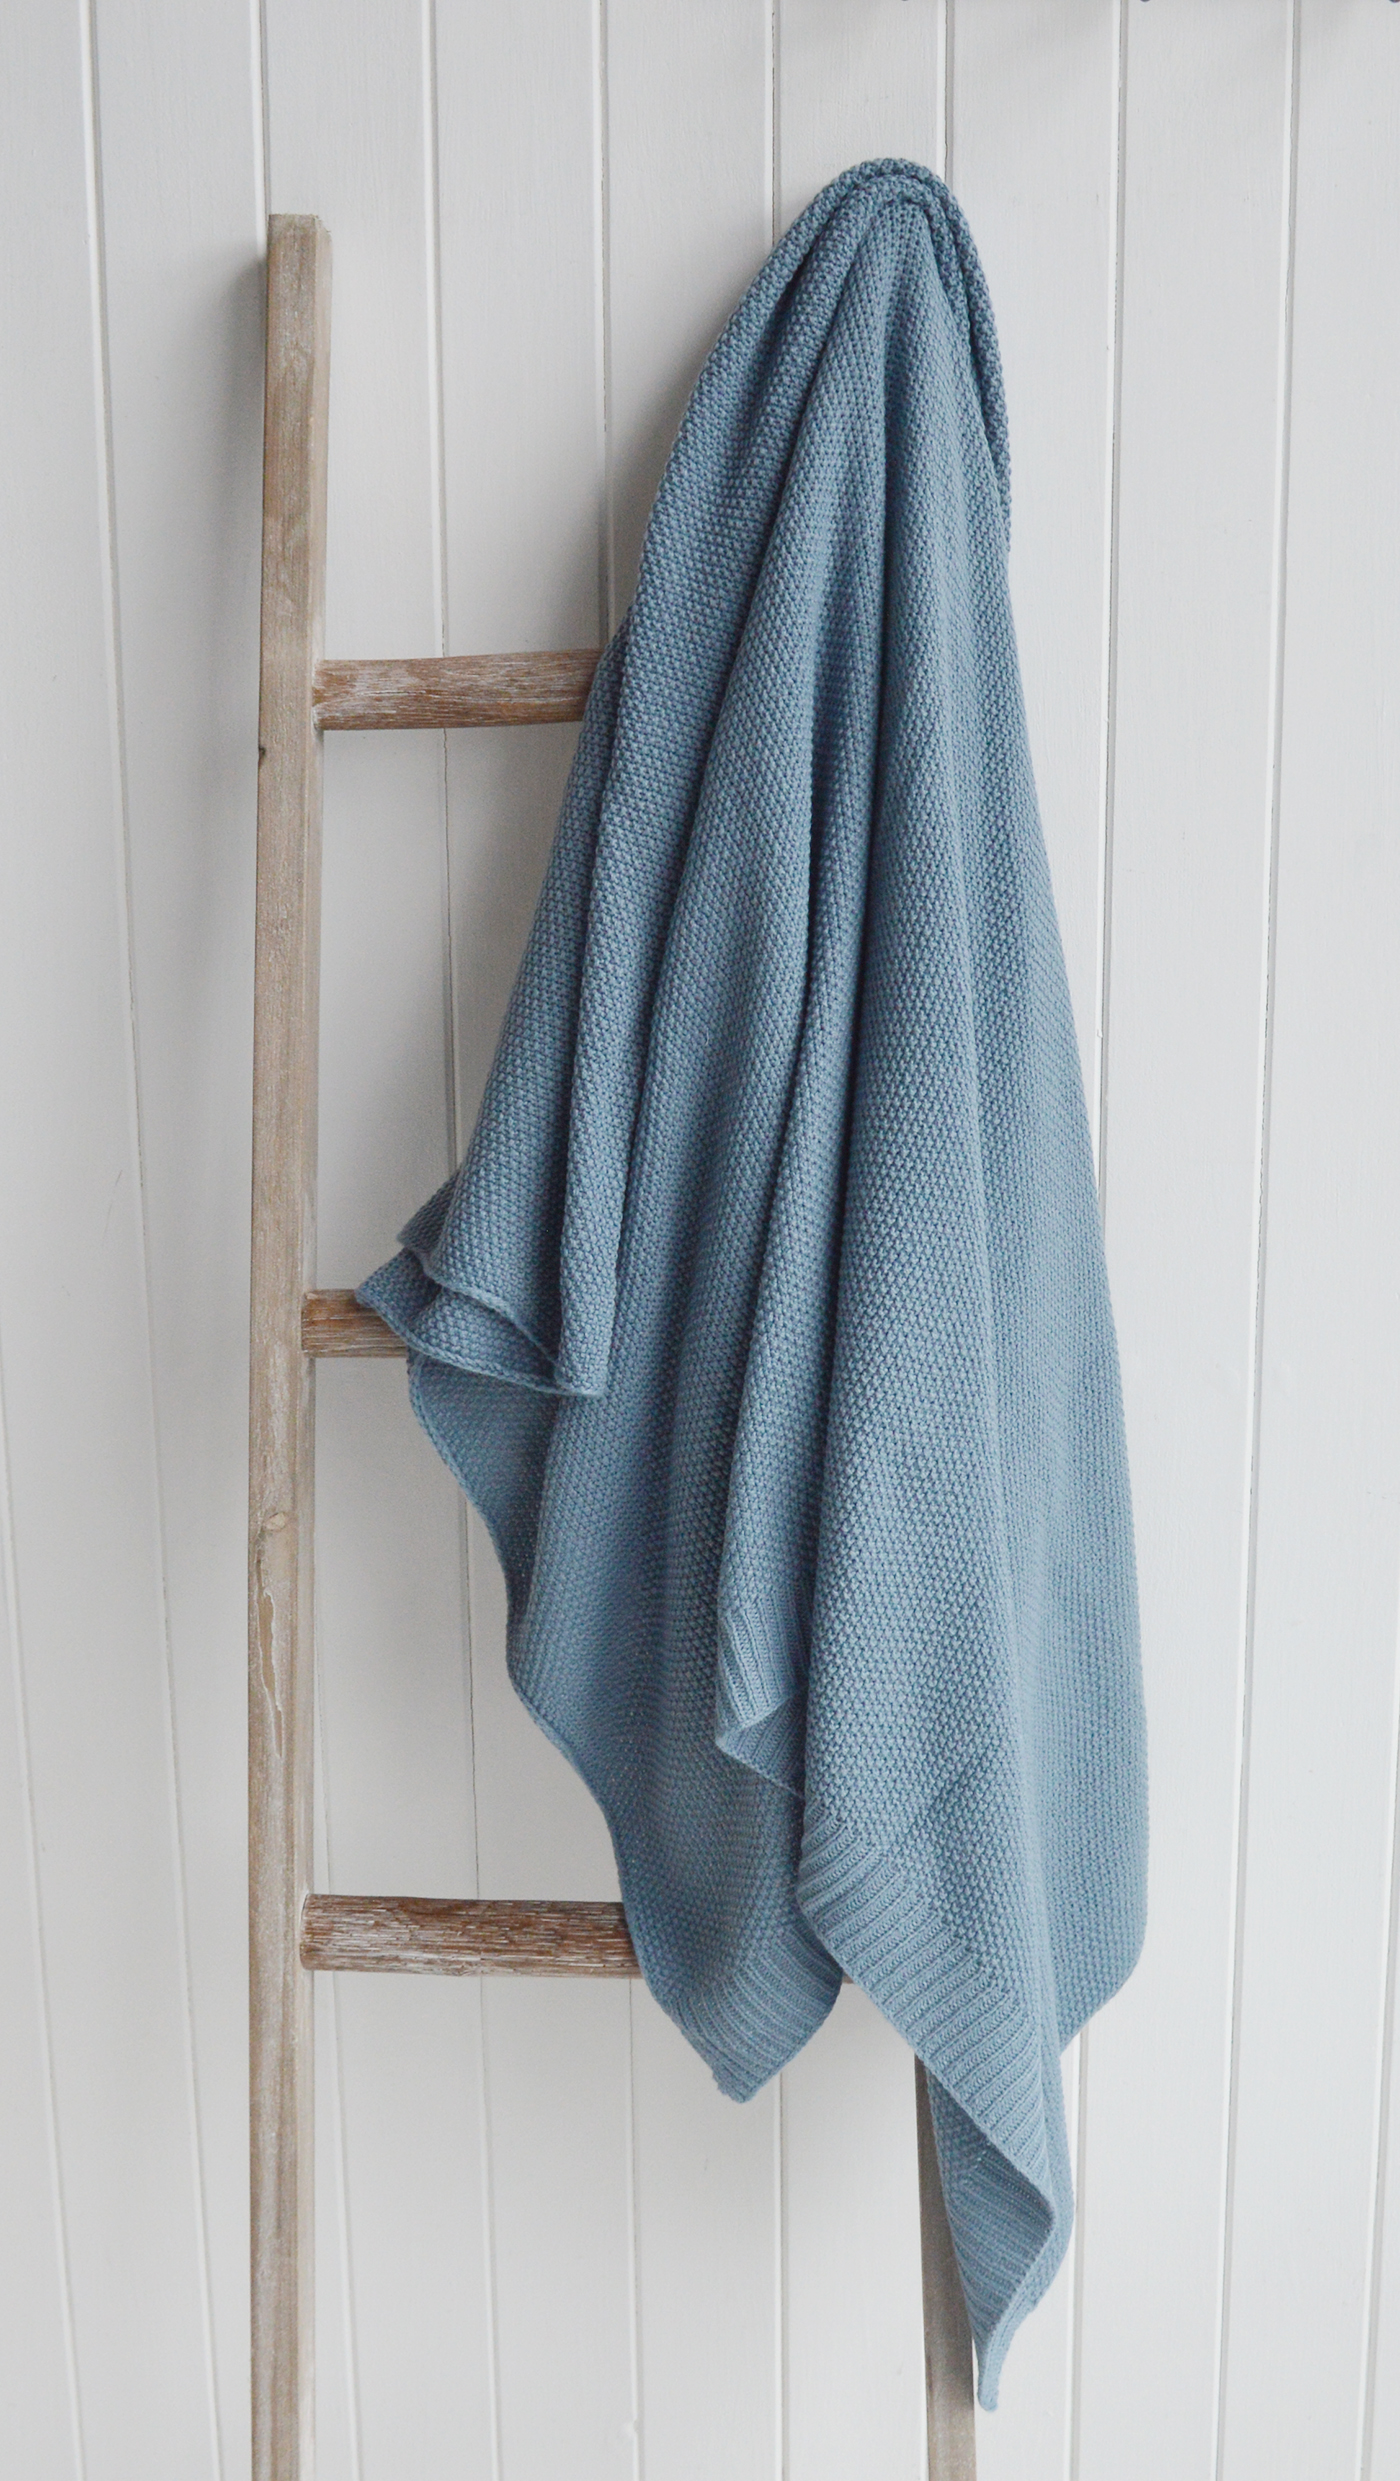 New England Style White Furniture and accessories for the home. Coastal, country and modern farmhouse interiors and furniture. Harrington Blue Knotted Throw throw and blankets